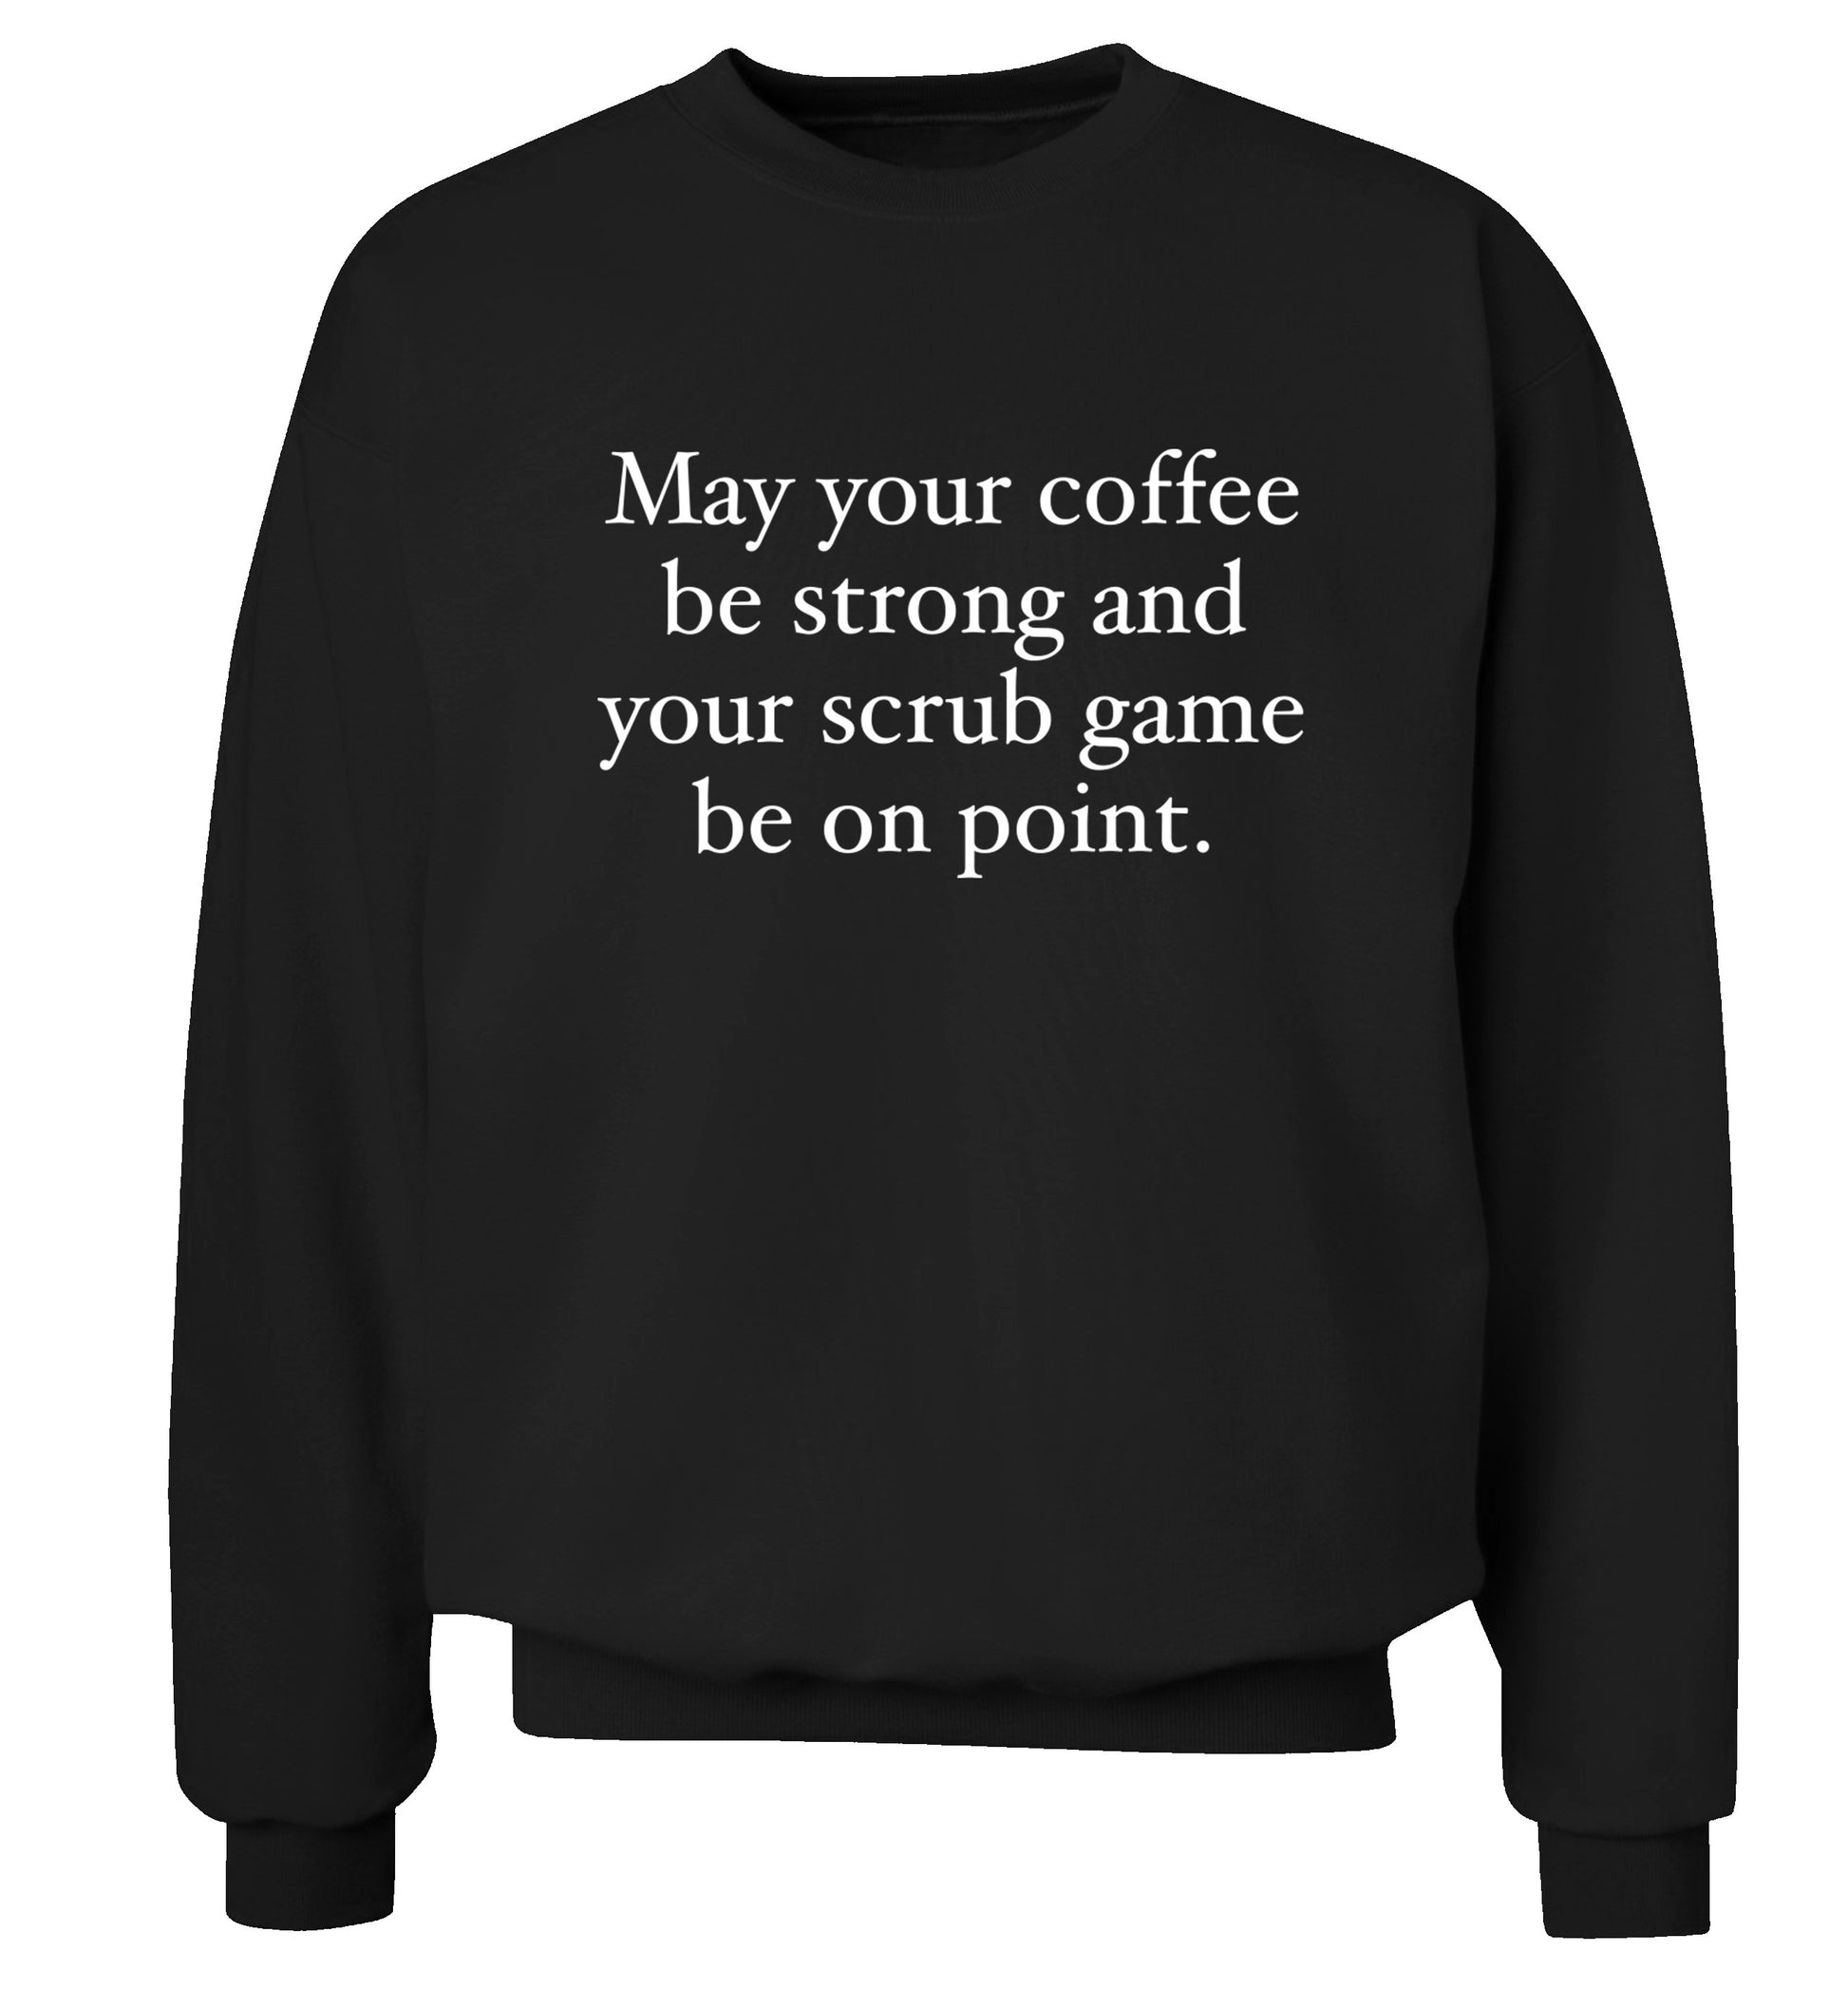 May your caffeine be strong and your scrub game be on point Adult's unisex black Sweater 2XL